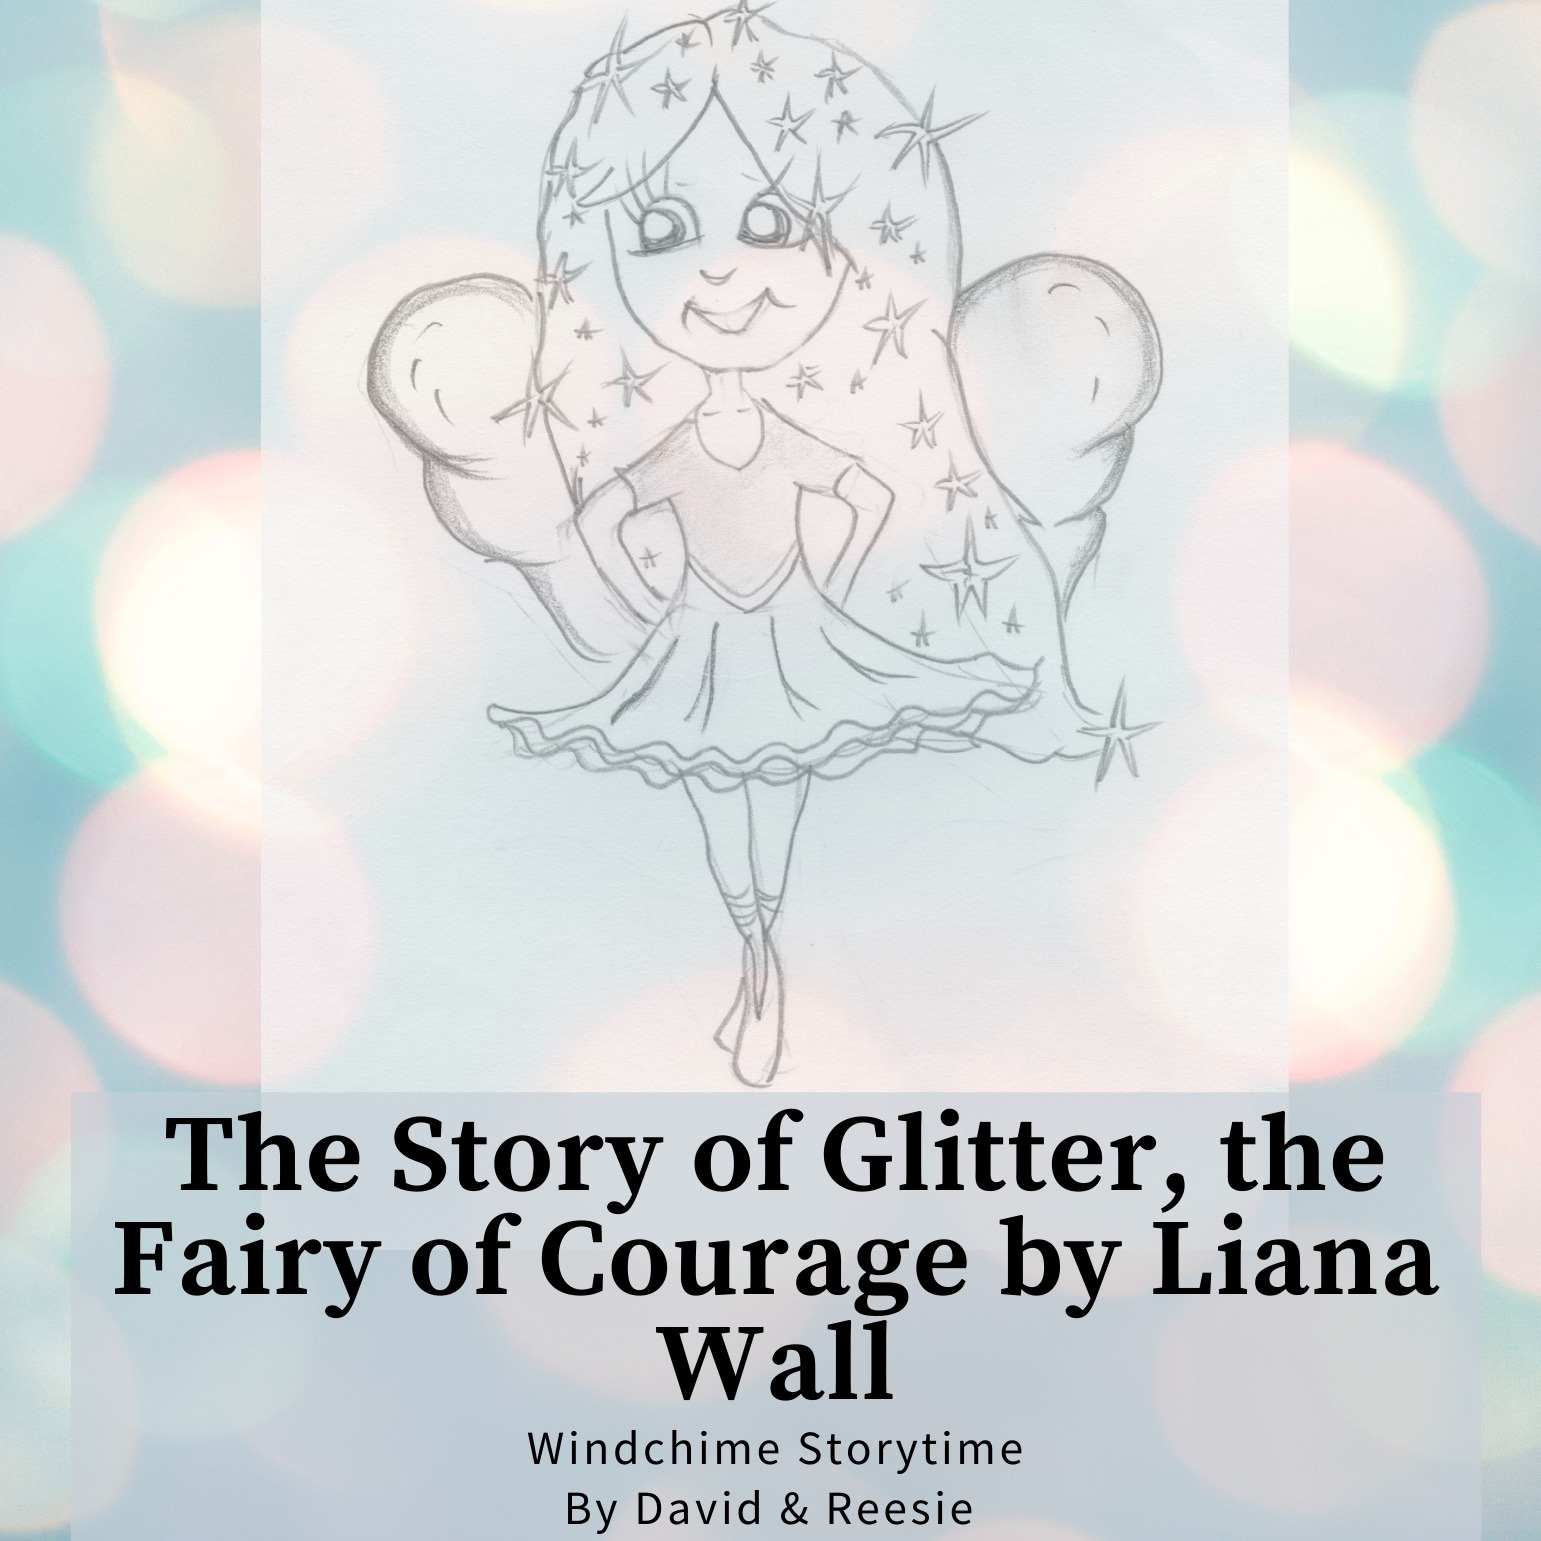 8- The Story of Glitter, the Fairy of Courage